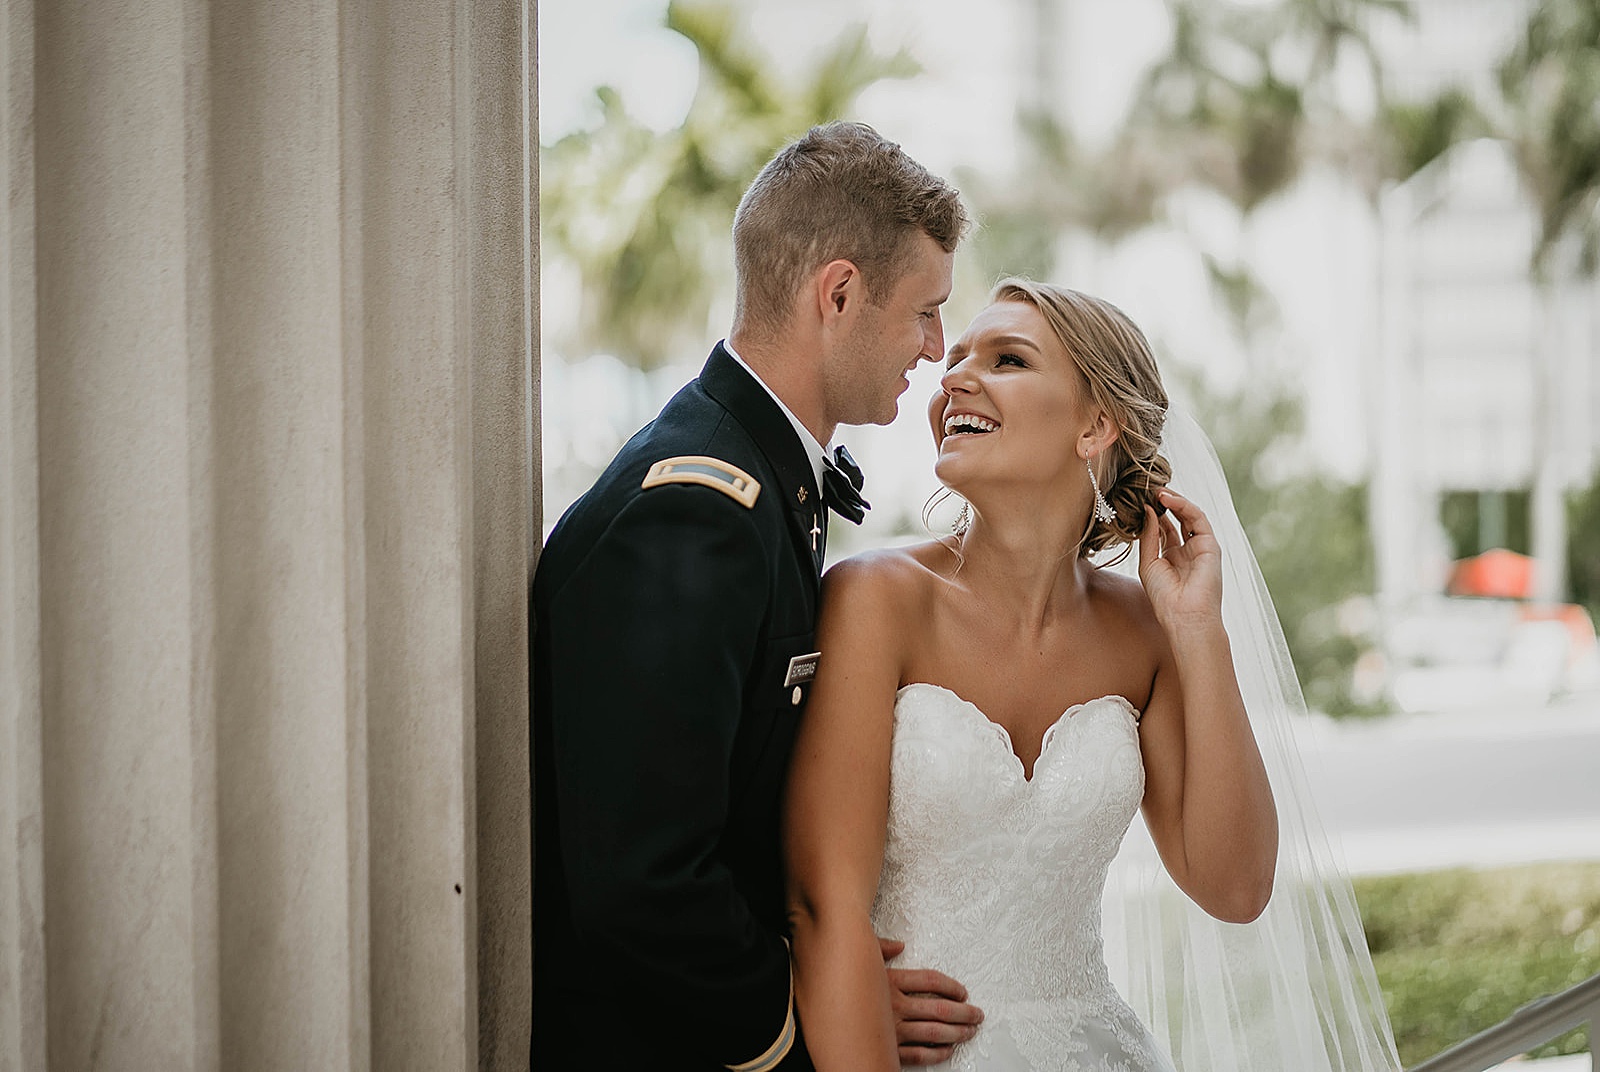 Family Church Downtown Wedding captured by West Palm Beach Wedding Photographer, Krystal Capone Photography